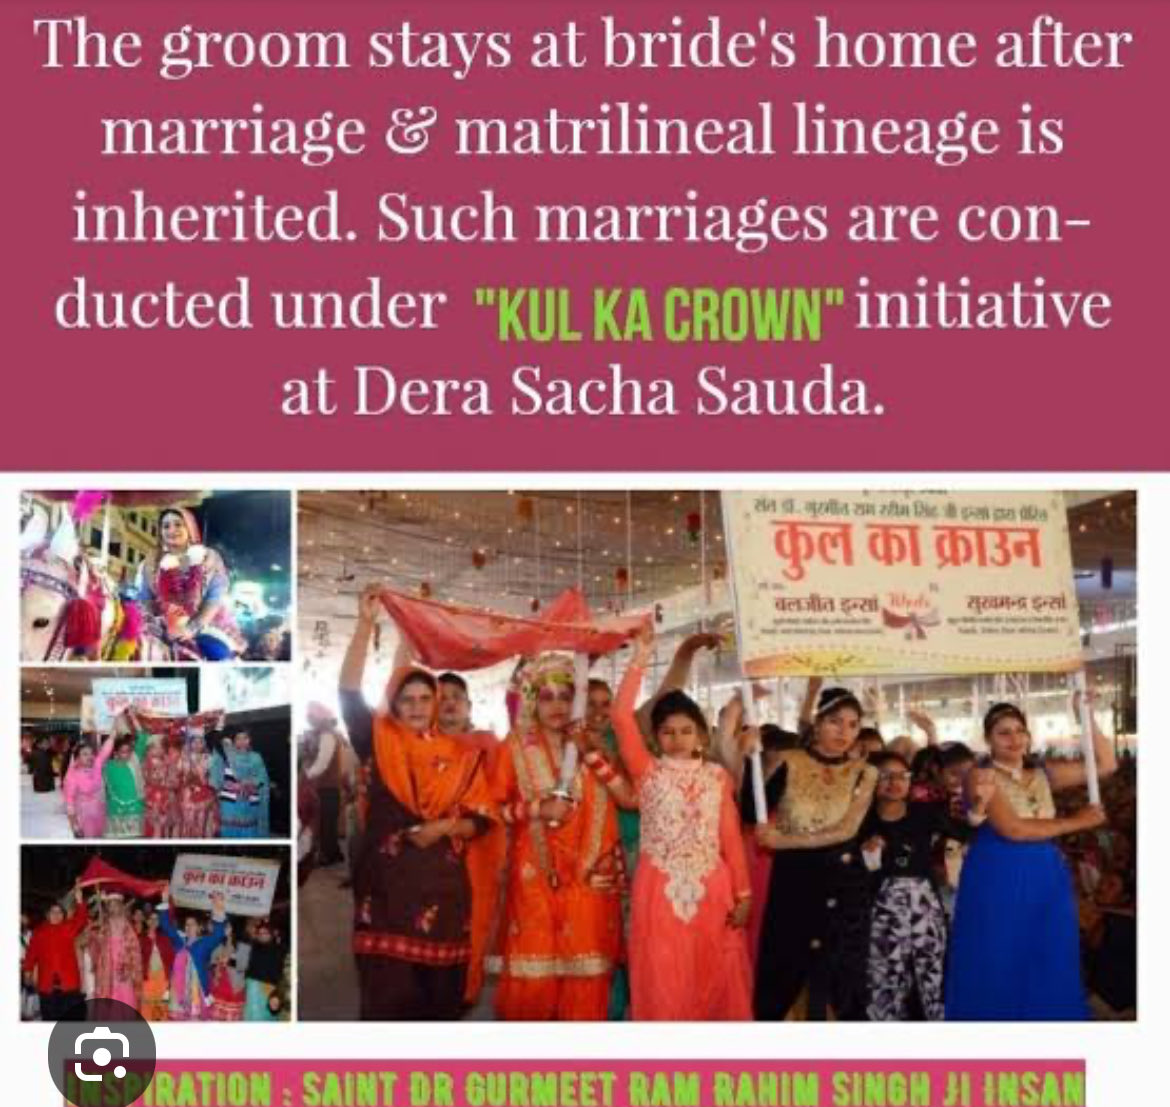 Like boys, now girls too are able to carry on the lineage of their parents. The 'Kul Ka Crown' initiative is a boon for single girl parents,and Feeling #TheProudDaughters of Saint Dr Gurmeet Ram Rahim Singh ji Insan